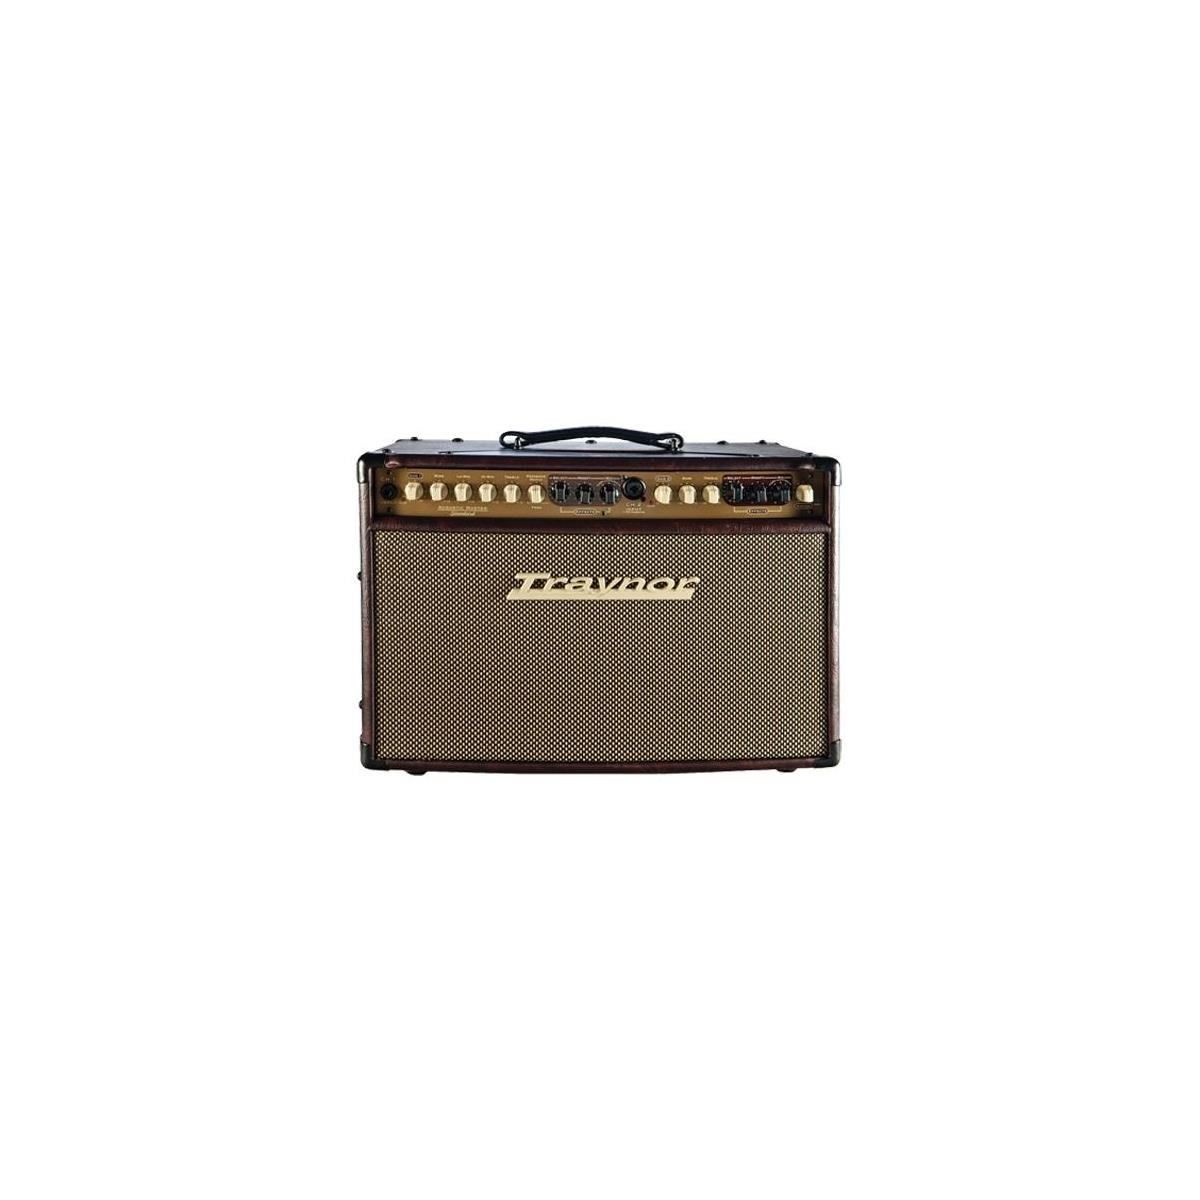 Image of Traynor AM Standard 150W Stereo Acoustic Guitar Amp